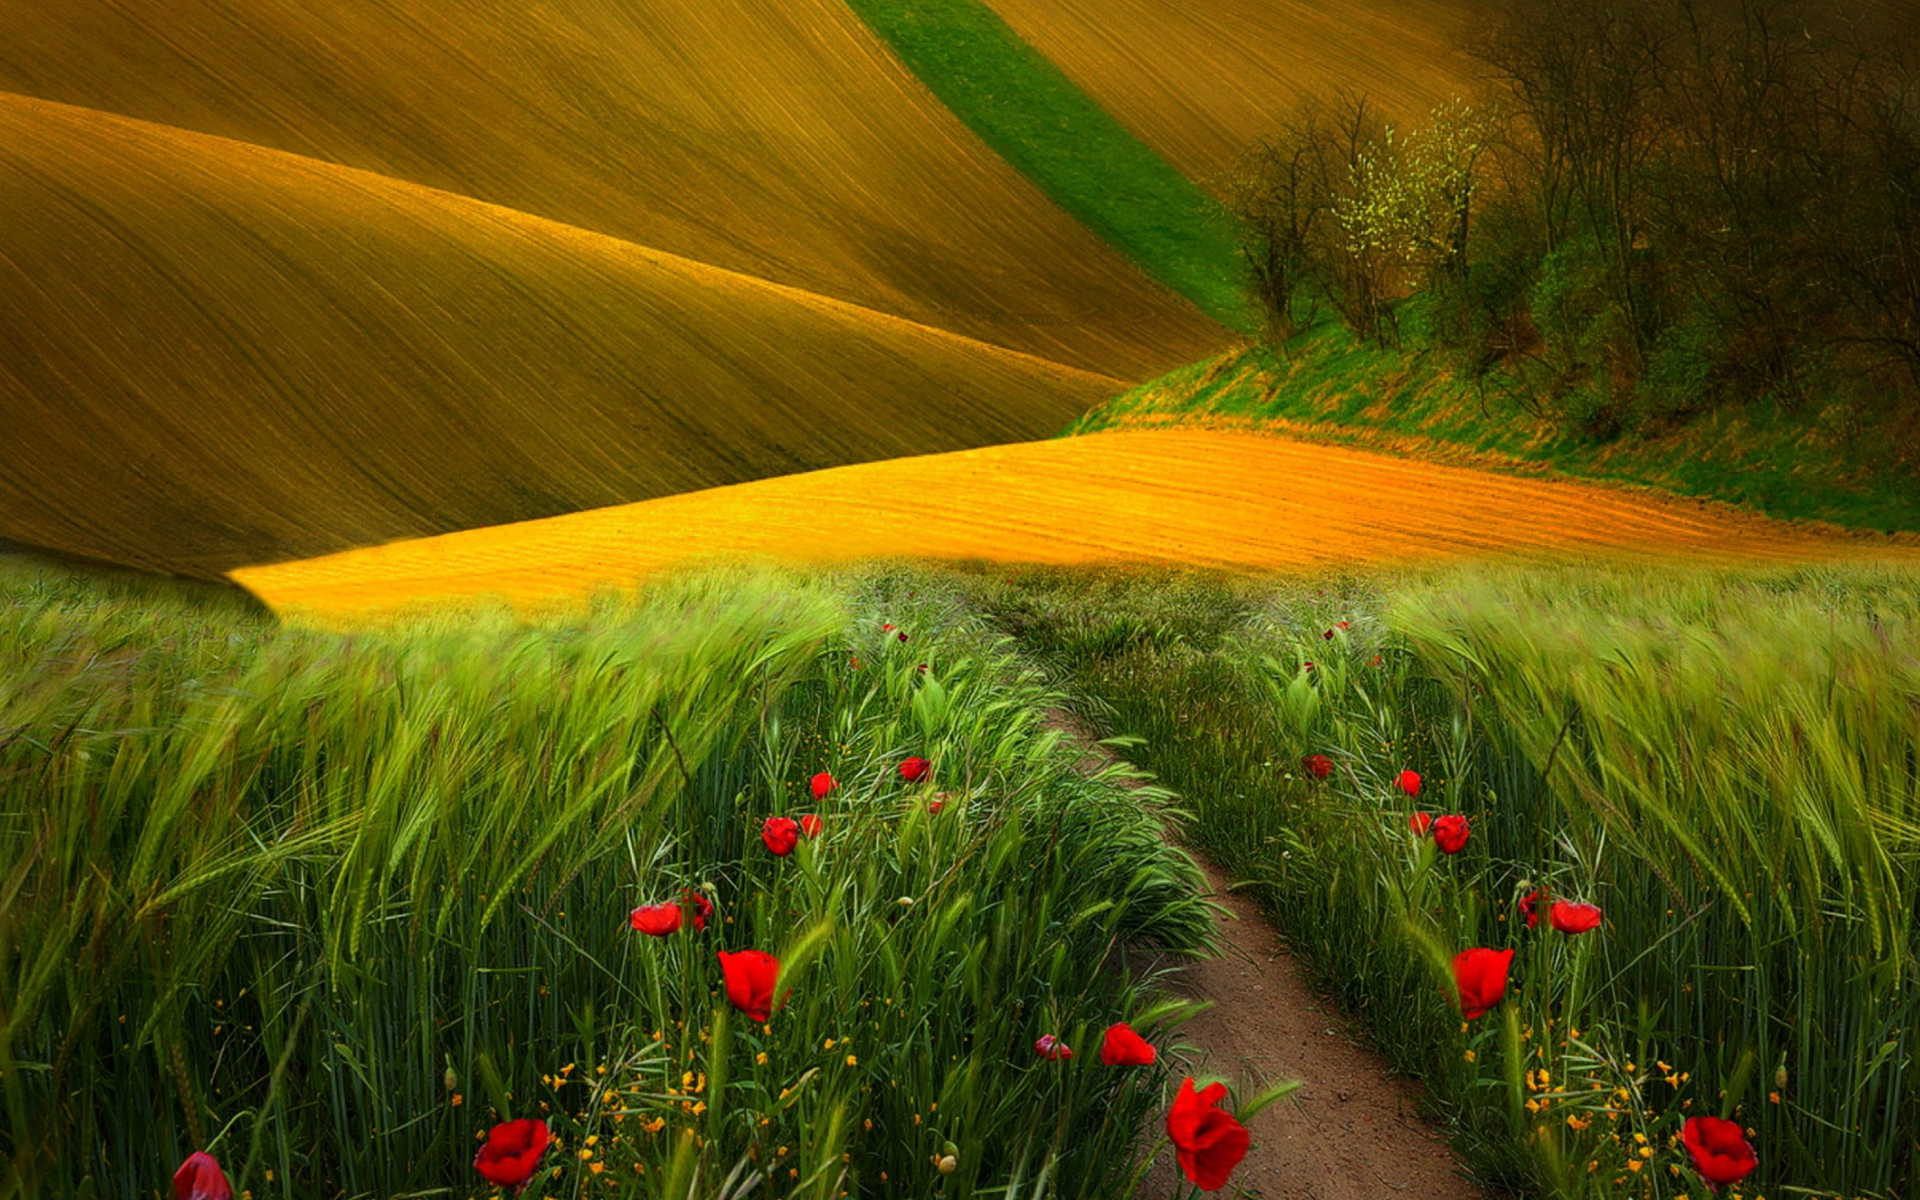 view, landscape, flowers, scenery, trees, field, nature, path, поле, colors, grass, poppies